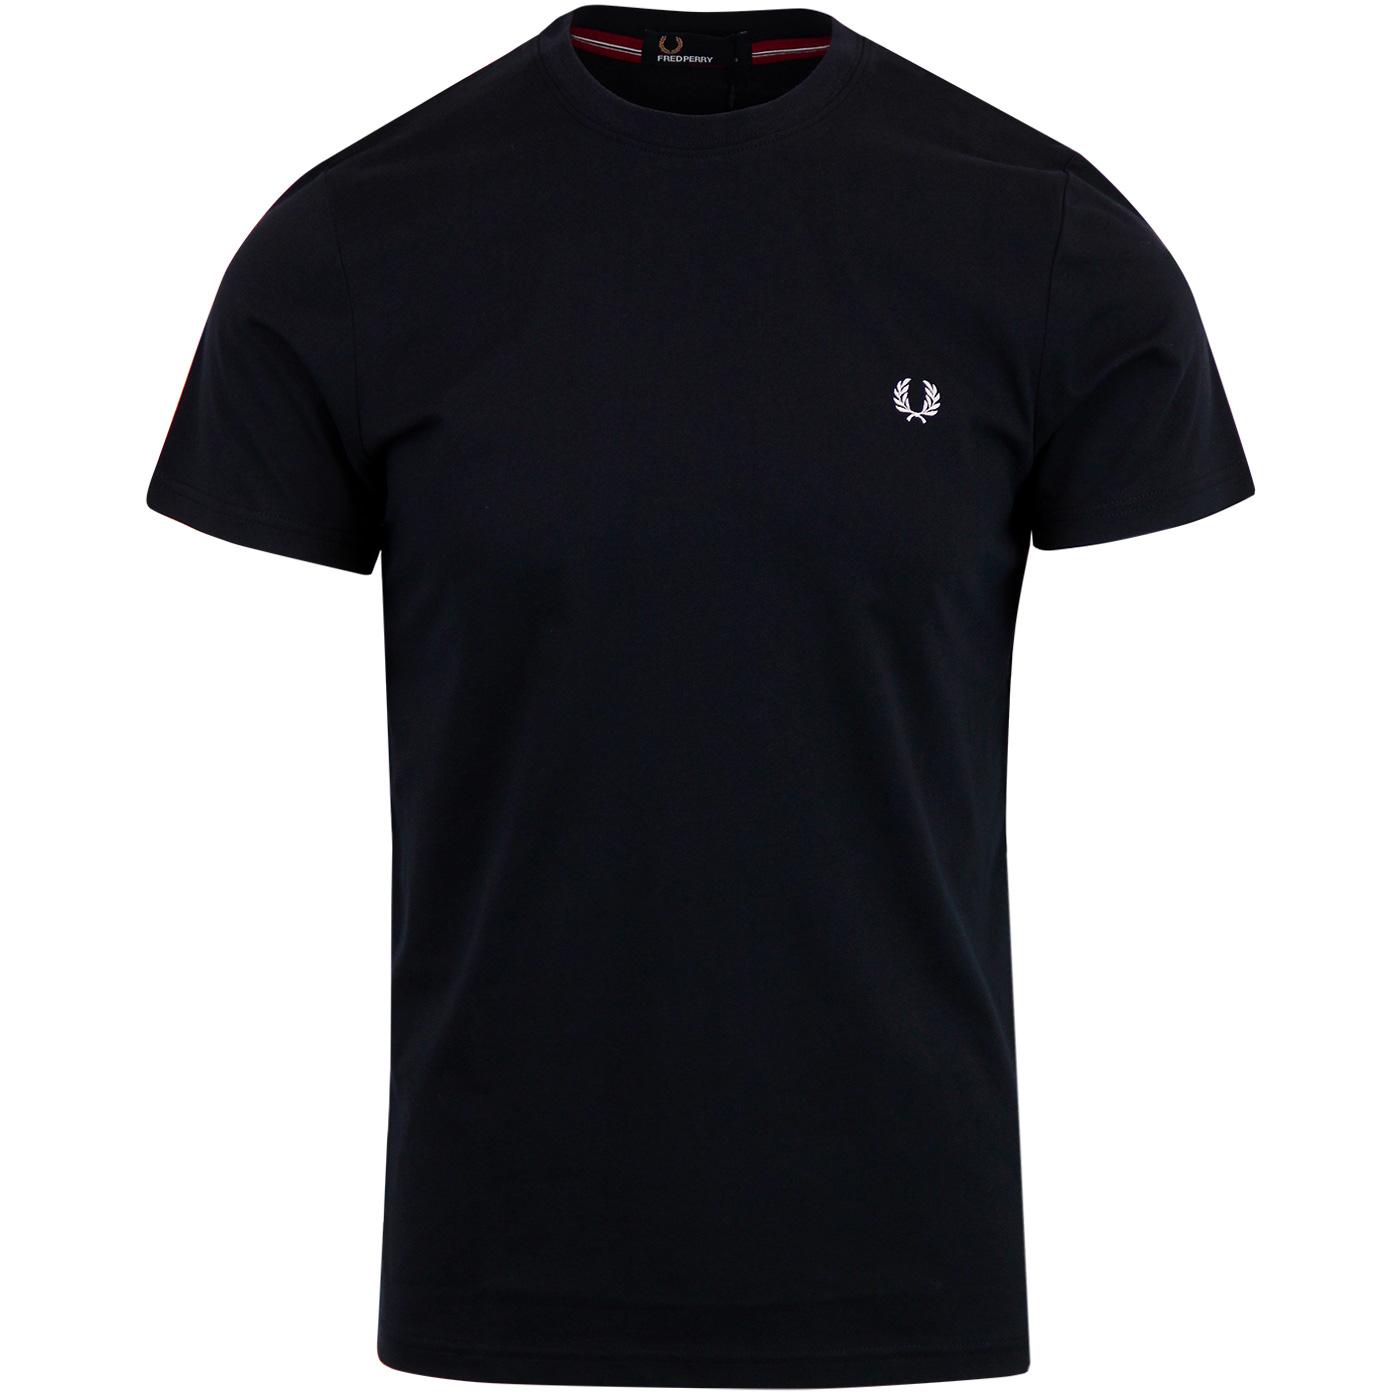 FRED PERRY Men's Retro Classic Crew Neck T-Shirt N